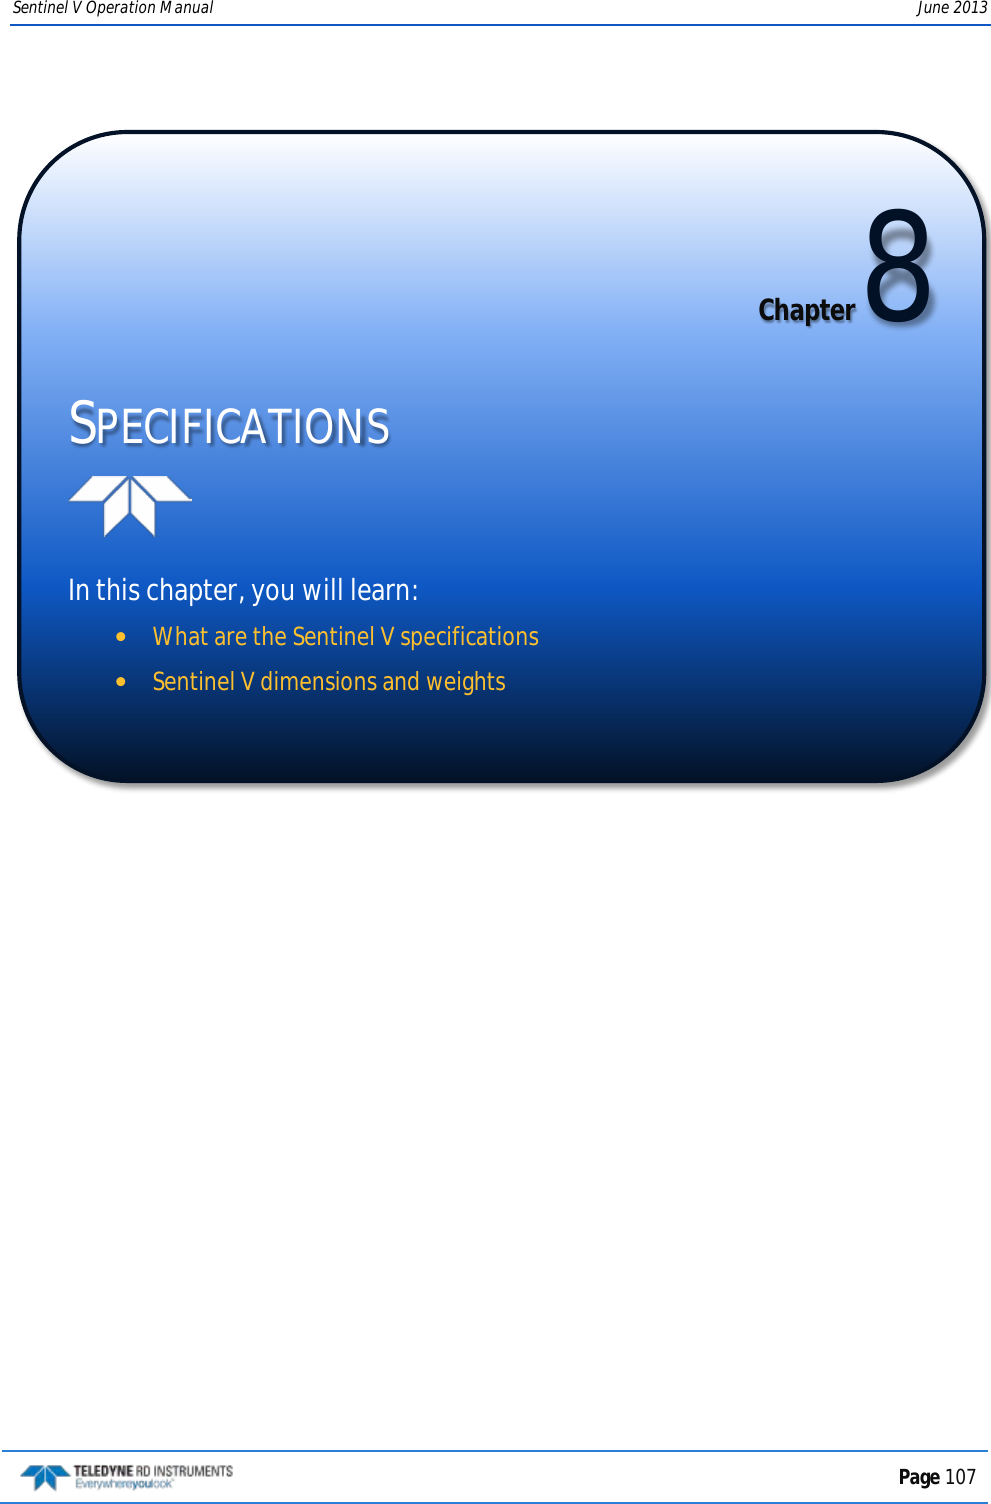 Sentinel V Operation Manual June 2013   Chapter 8 SPECIFICATIONS   In this chapter, you will learn: •What are the Sentinel V specifications •Sentinel V dimensions and weights   Page 107  